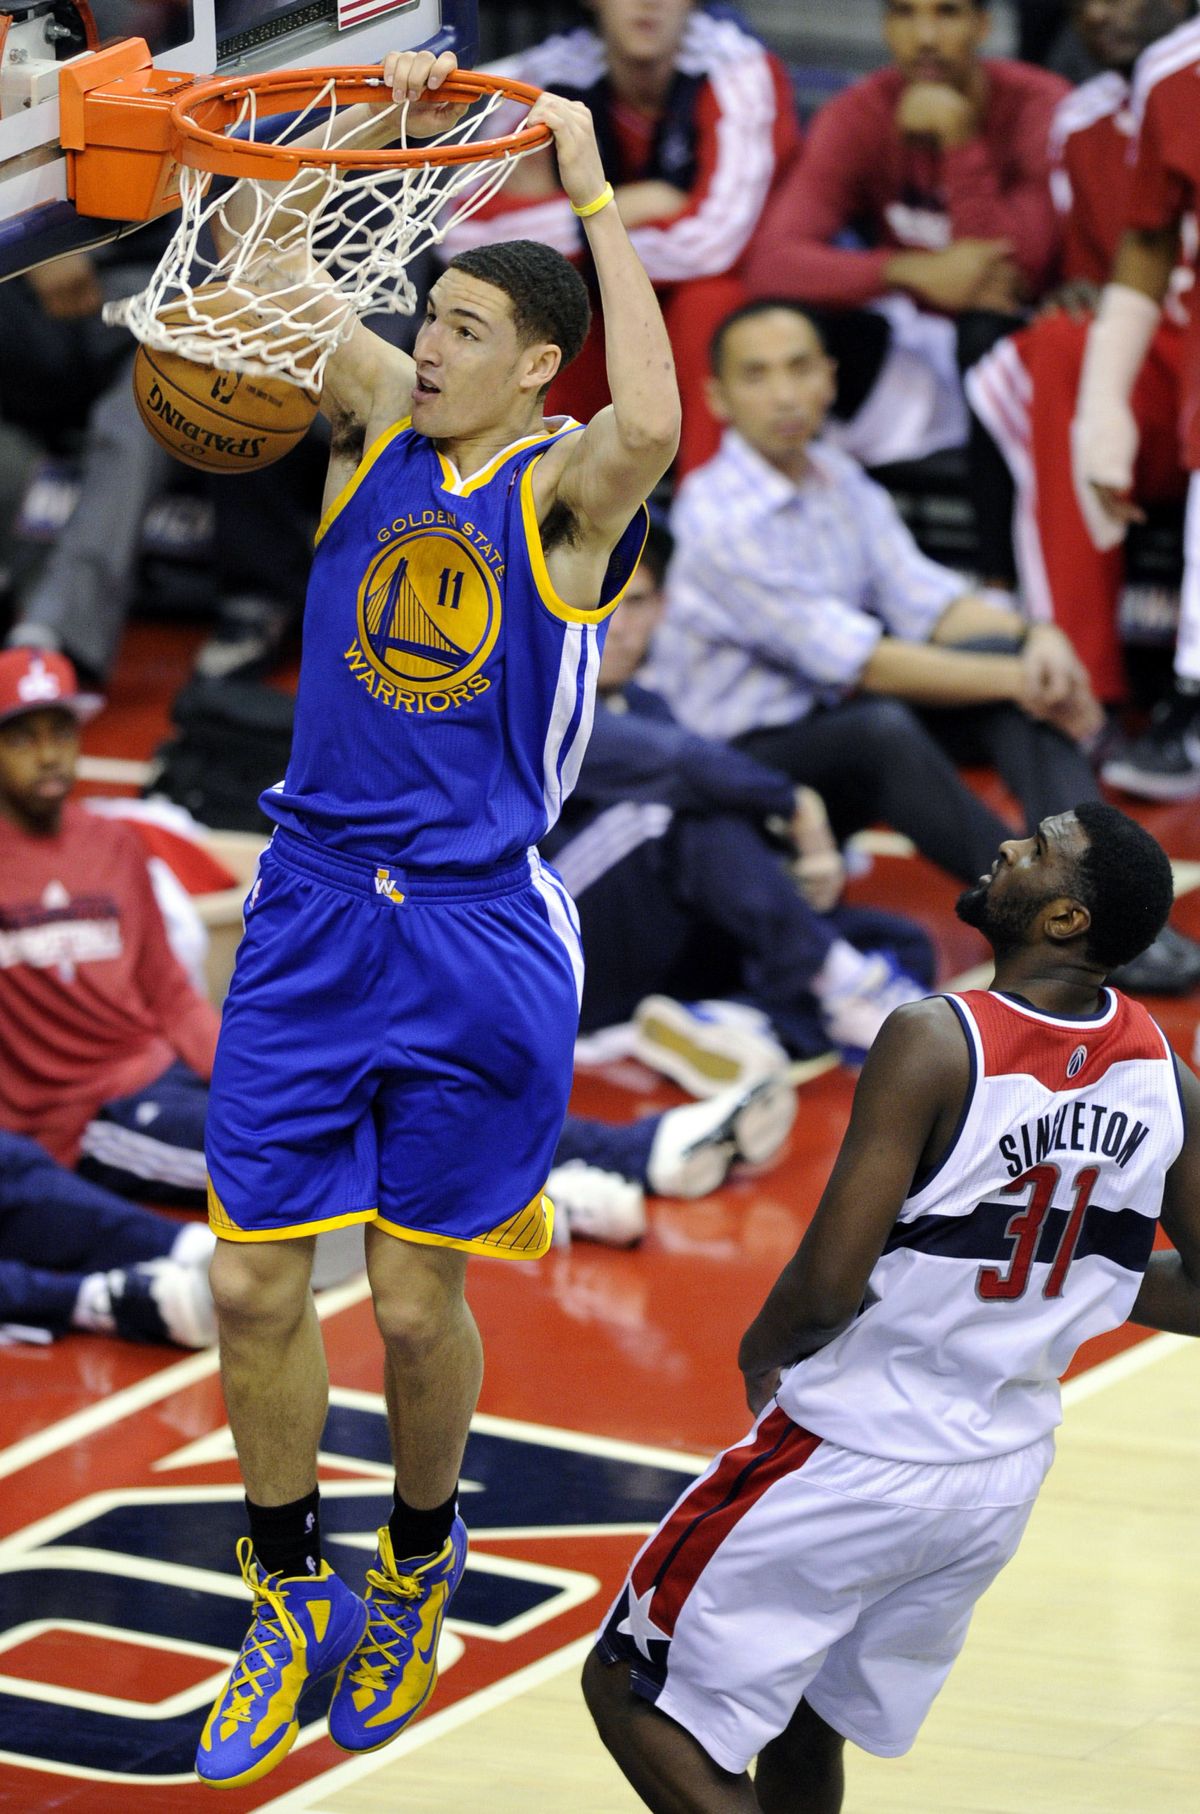 Klay Thompson throws down a dunk, but the former Cougar has worked hard on his defense. (Associated Press)